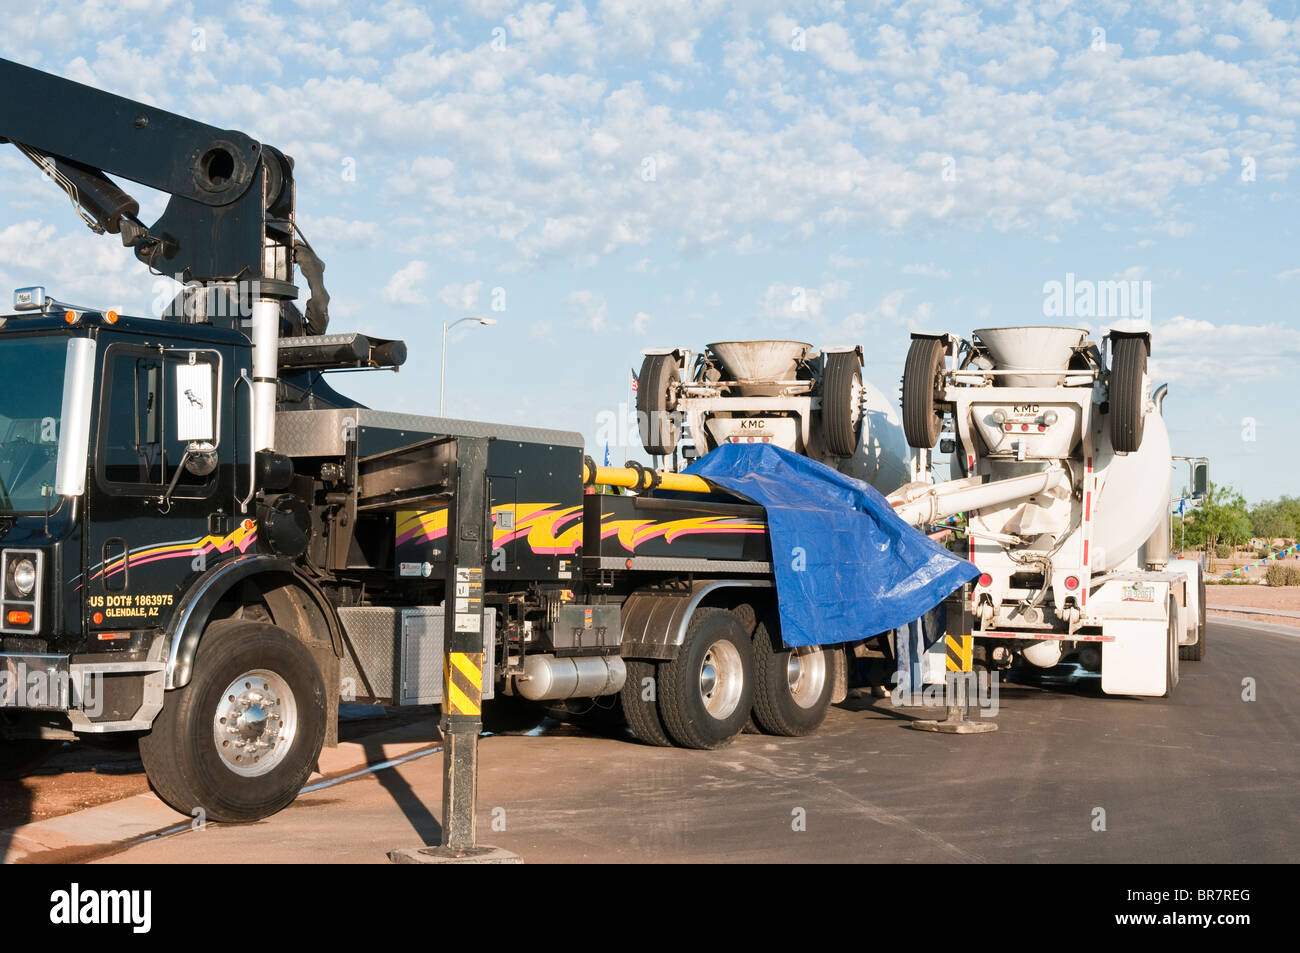 Concrete trucks feed a boom truck used for pumping concrete for a new house under construction in Arizona. Stock Photo